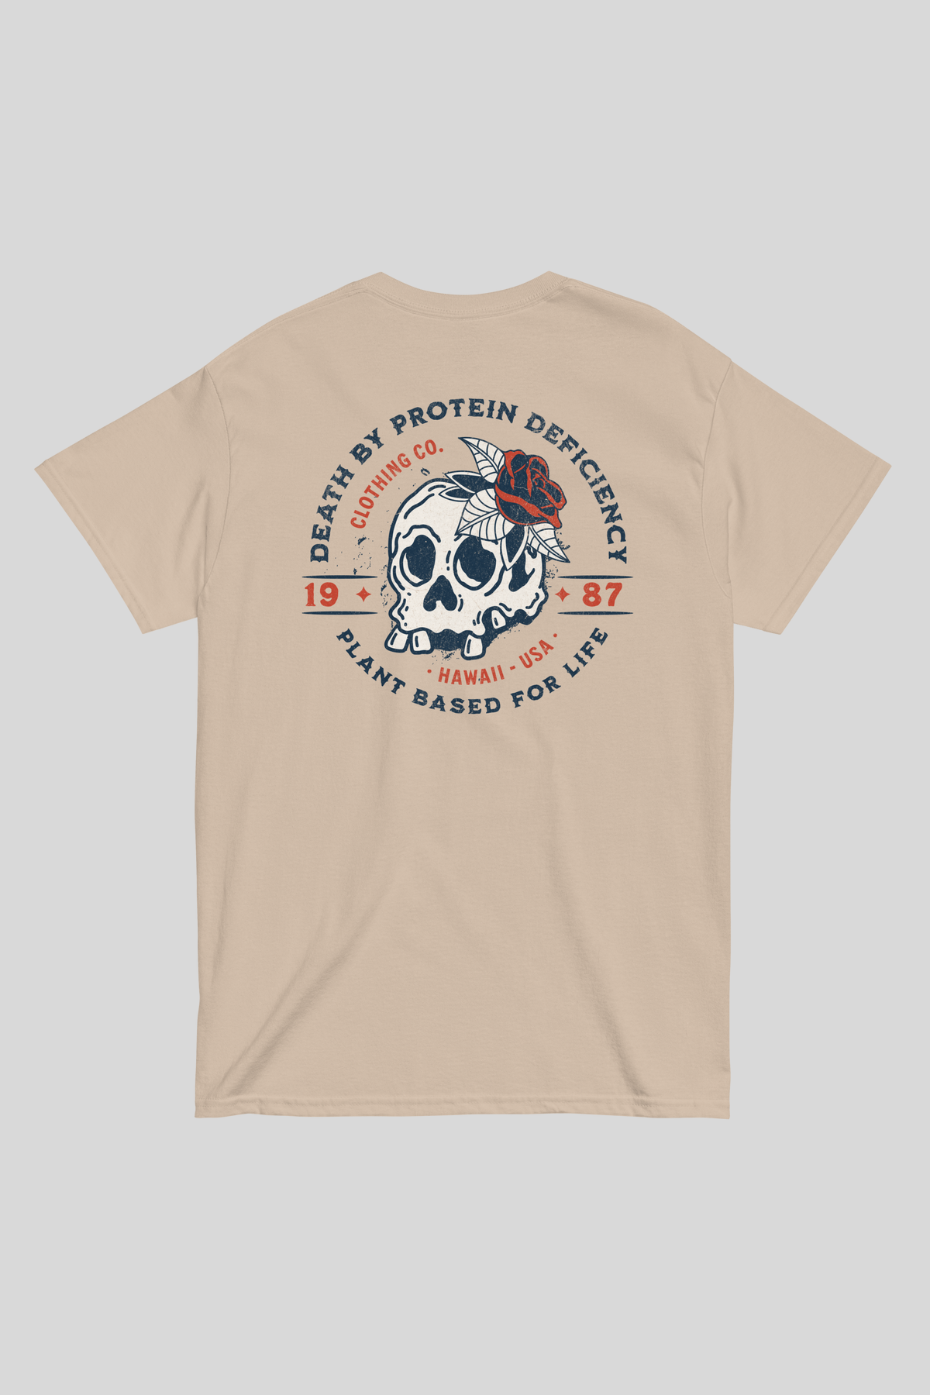 Death By Protein Deficiency Unisex tee